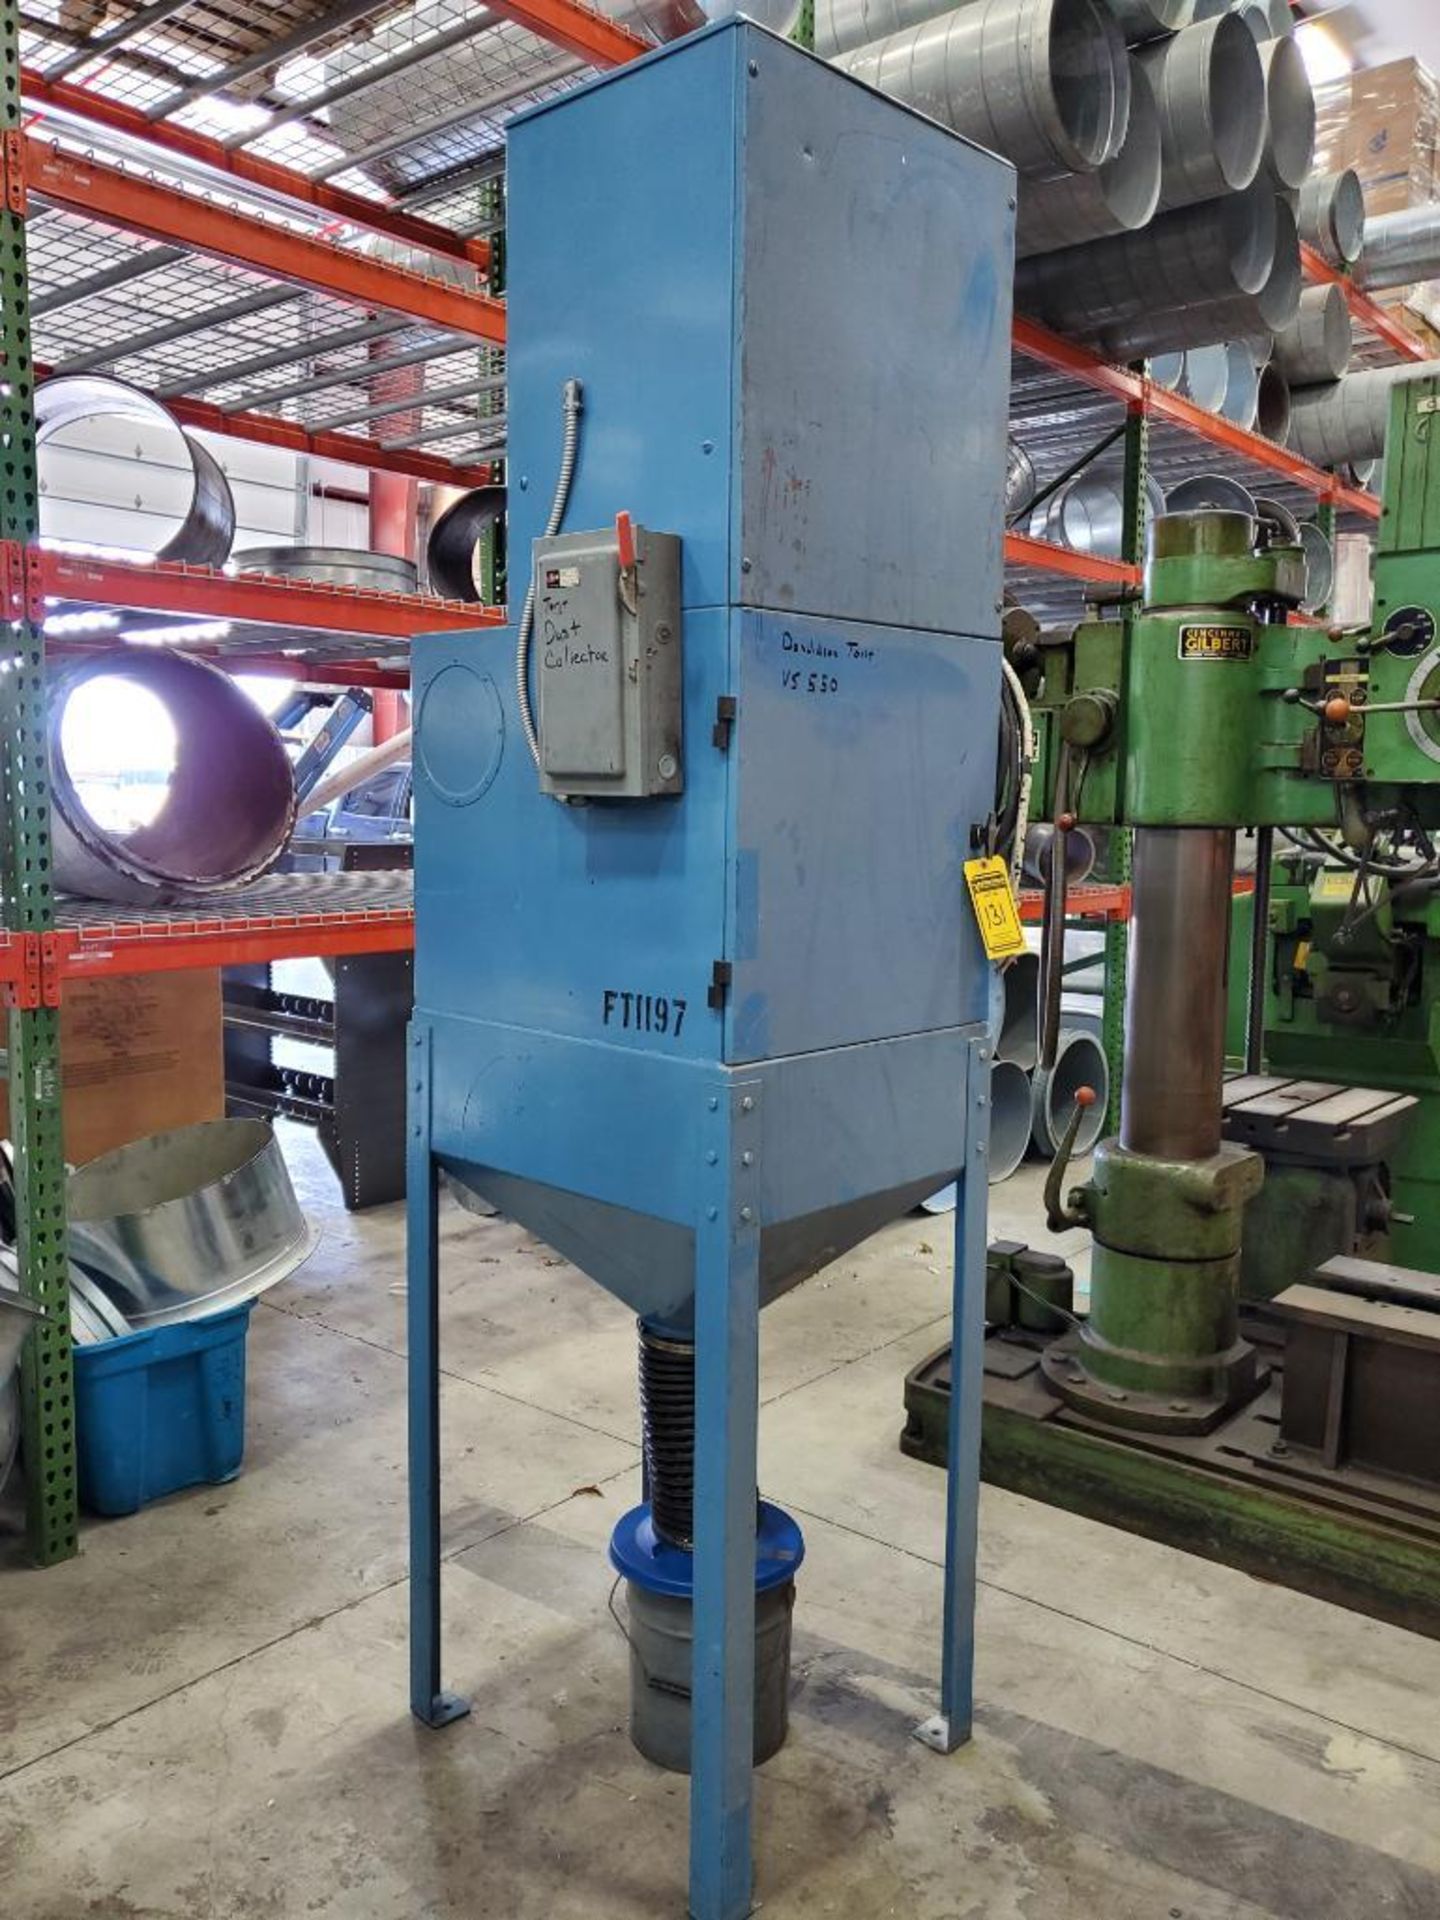 Donaldson Torit VS 550 Down Draft Dust Collector, Refurbished 4/21/21 - Image 3 of 6